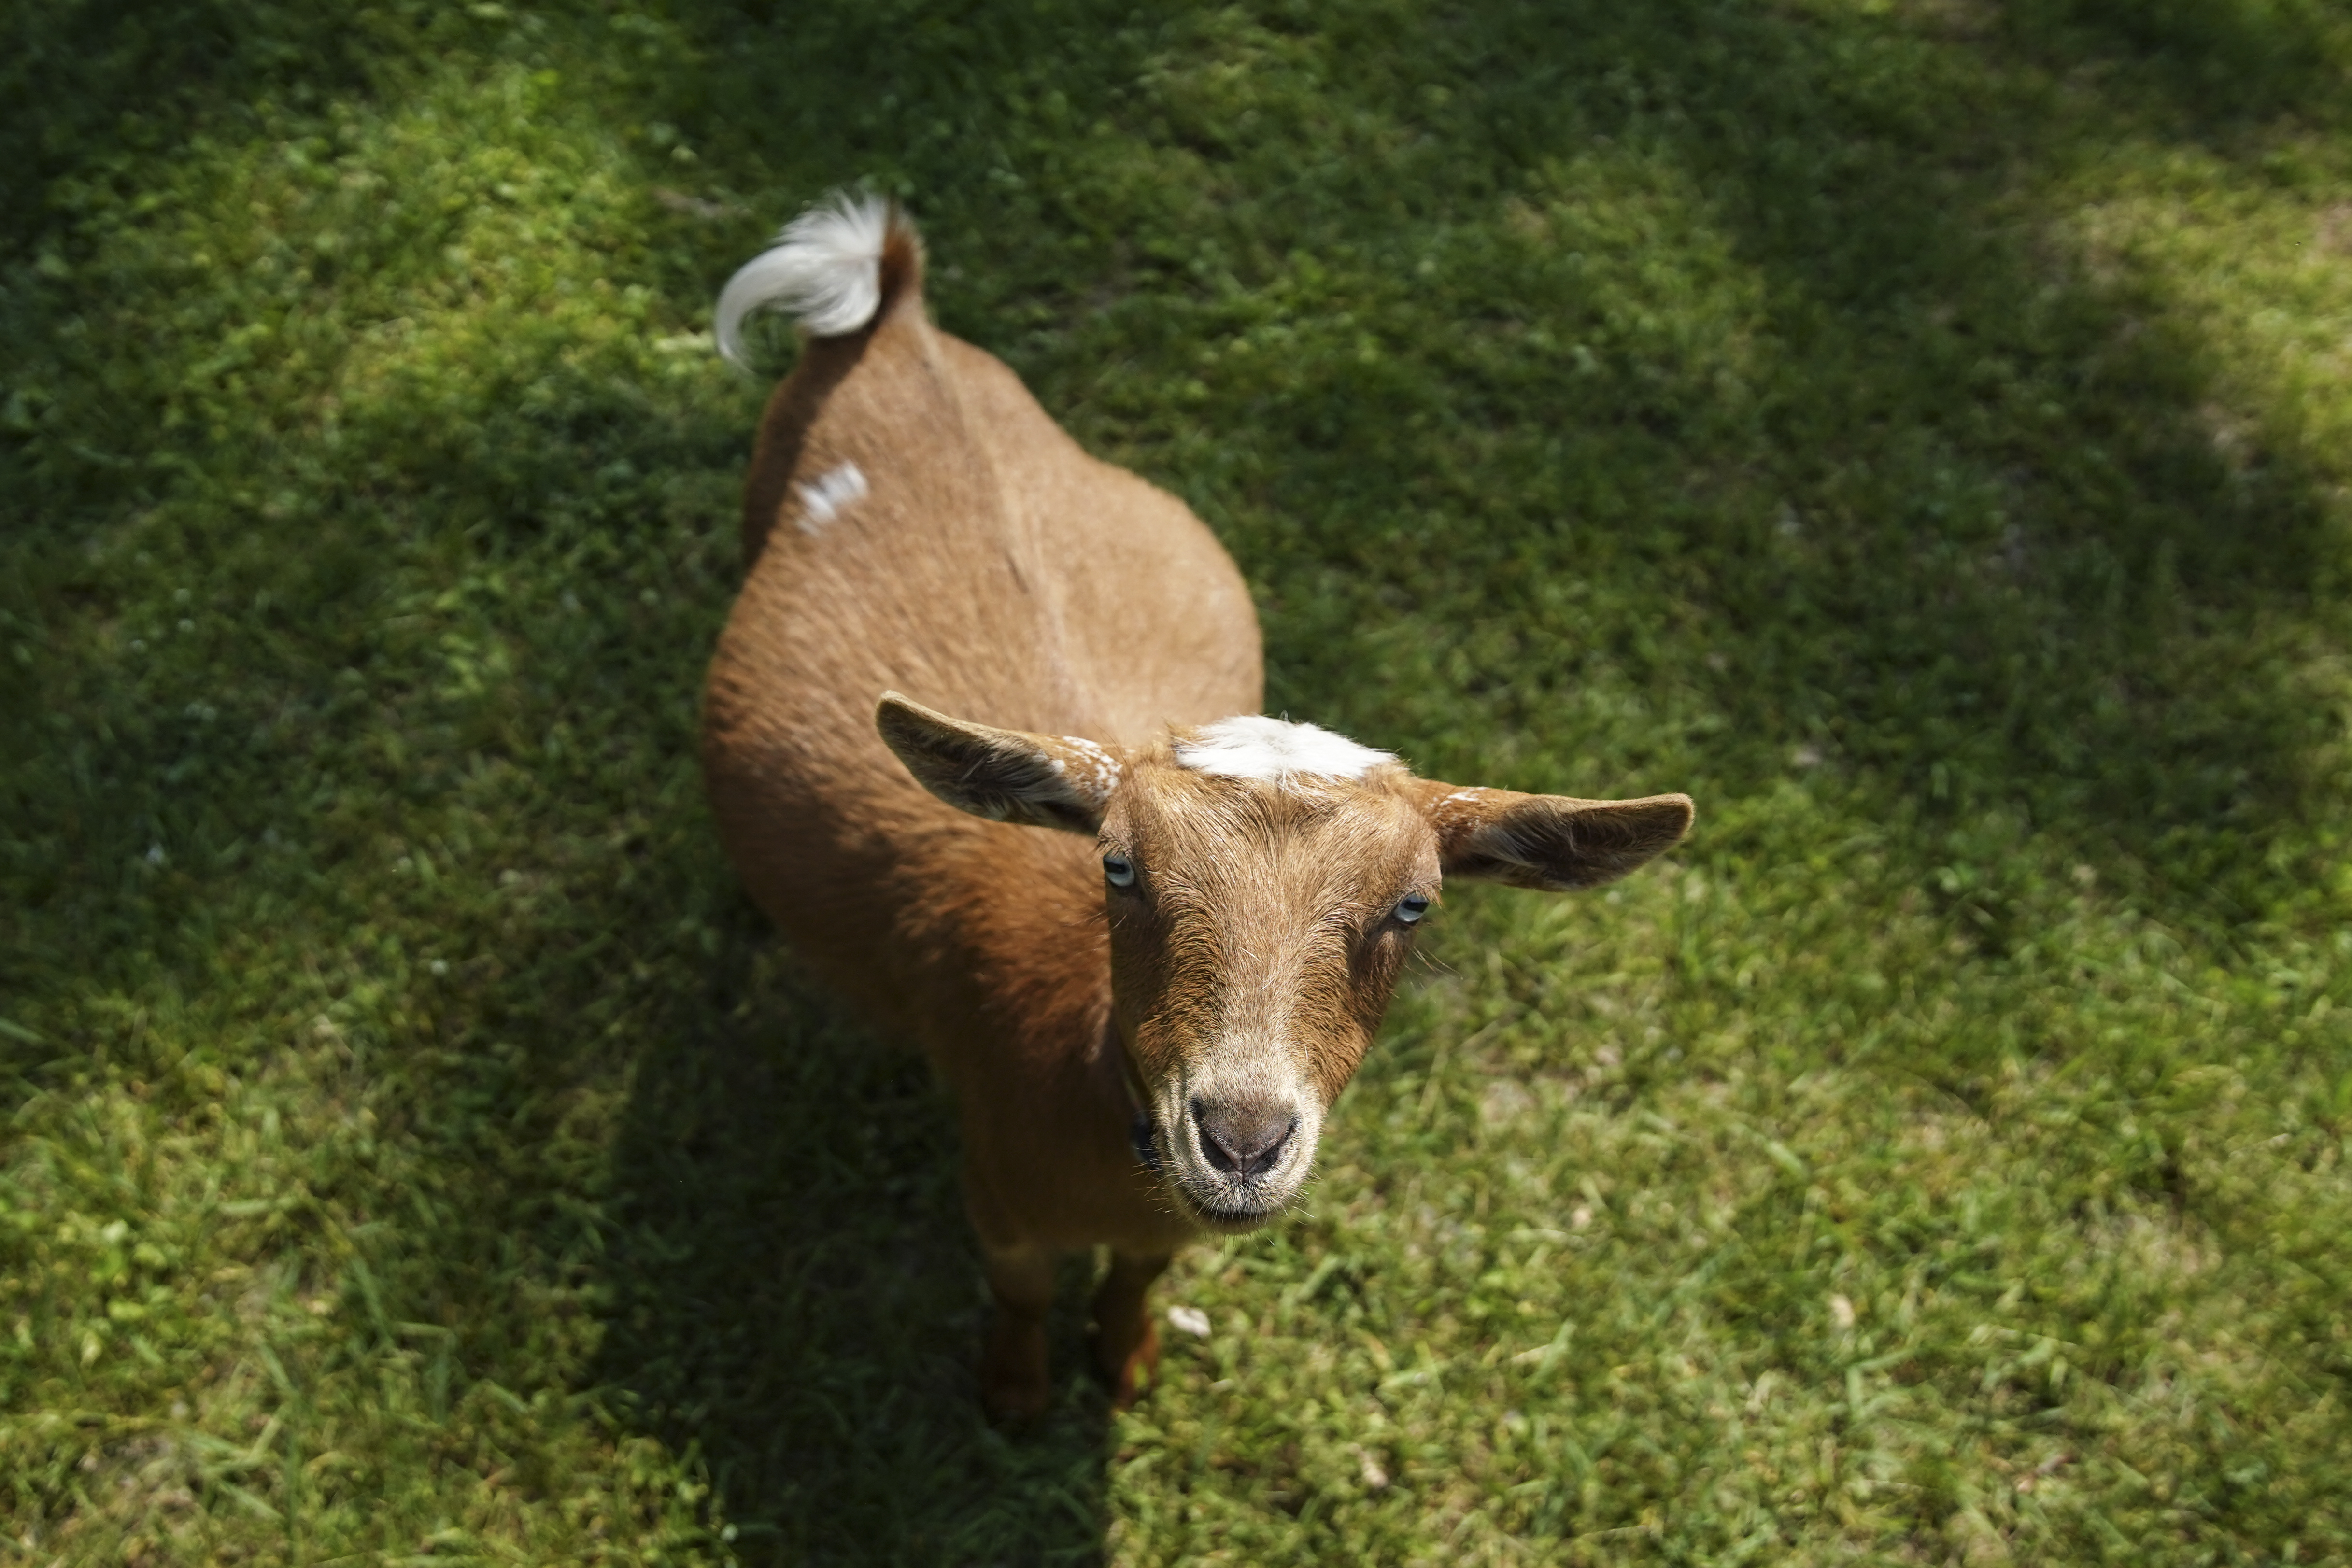 Union Files Grievance Over Mowing Goats Used At University In Michigan -  CBS Detroit